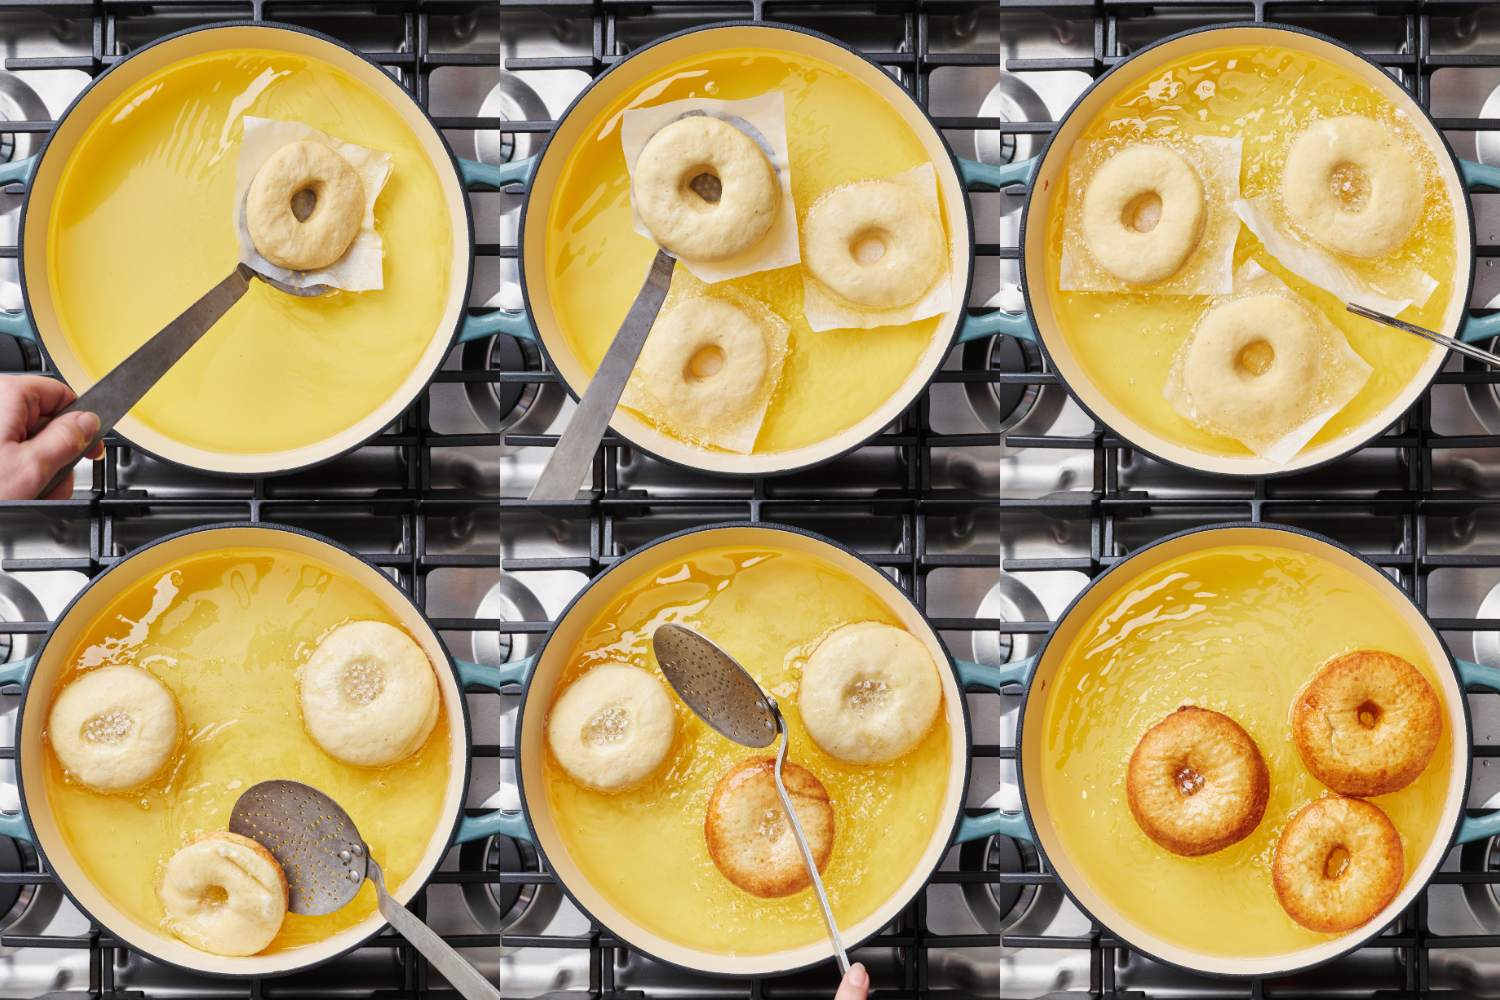 a collage of six images showing how to fry the doughnuts.